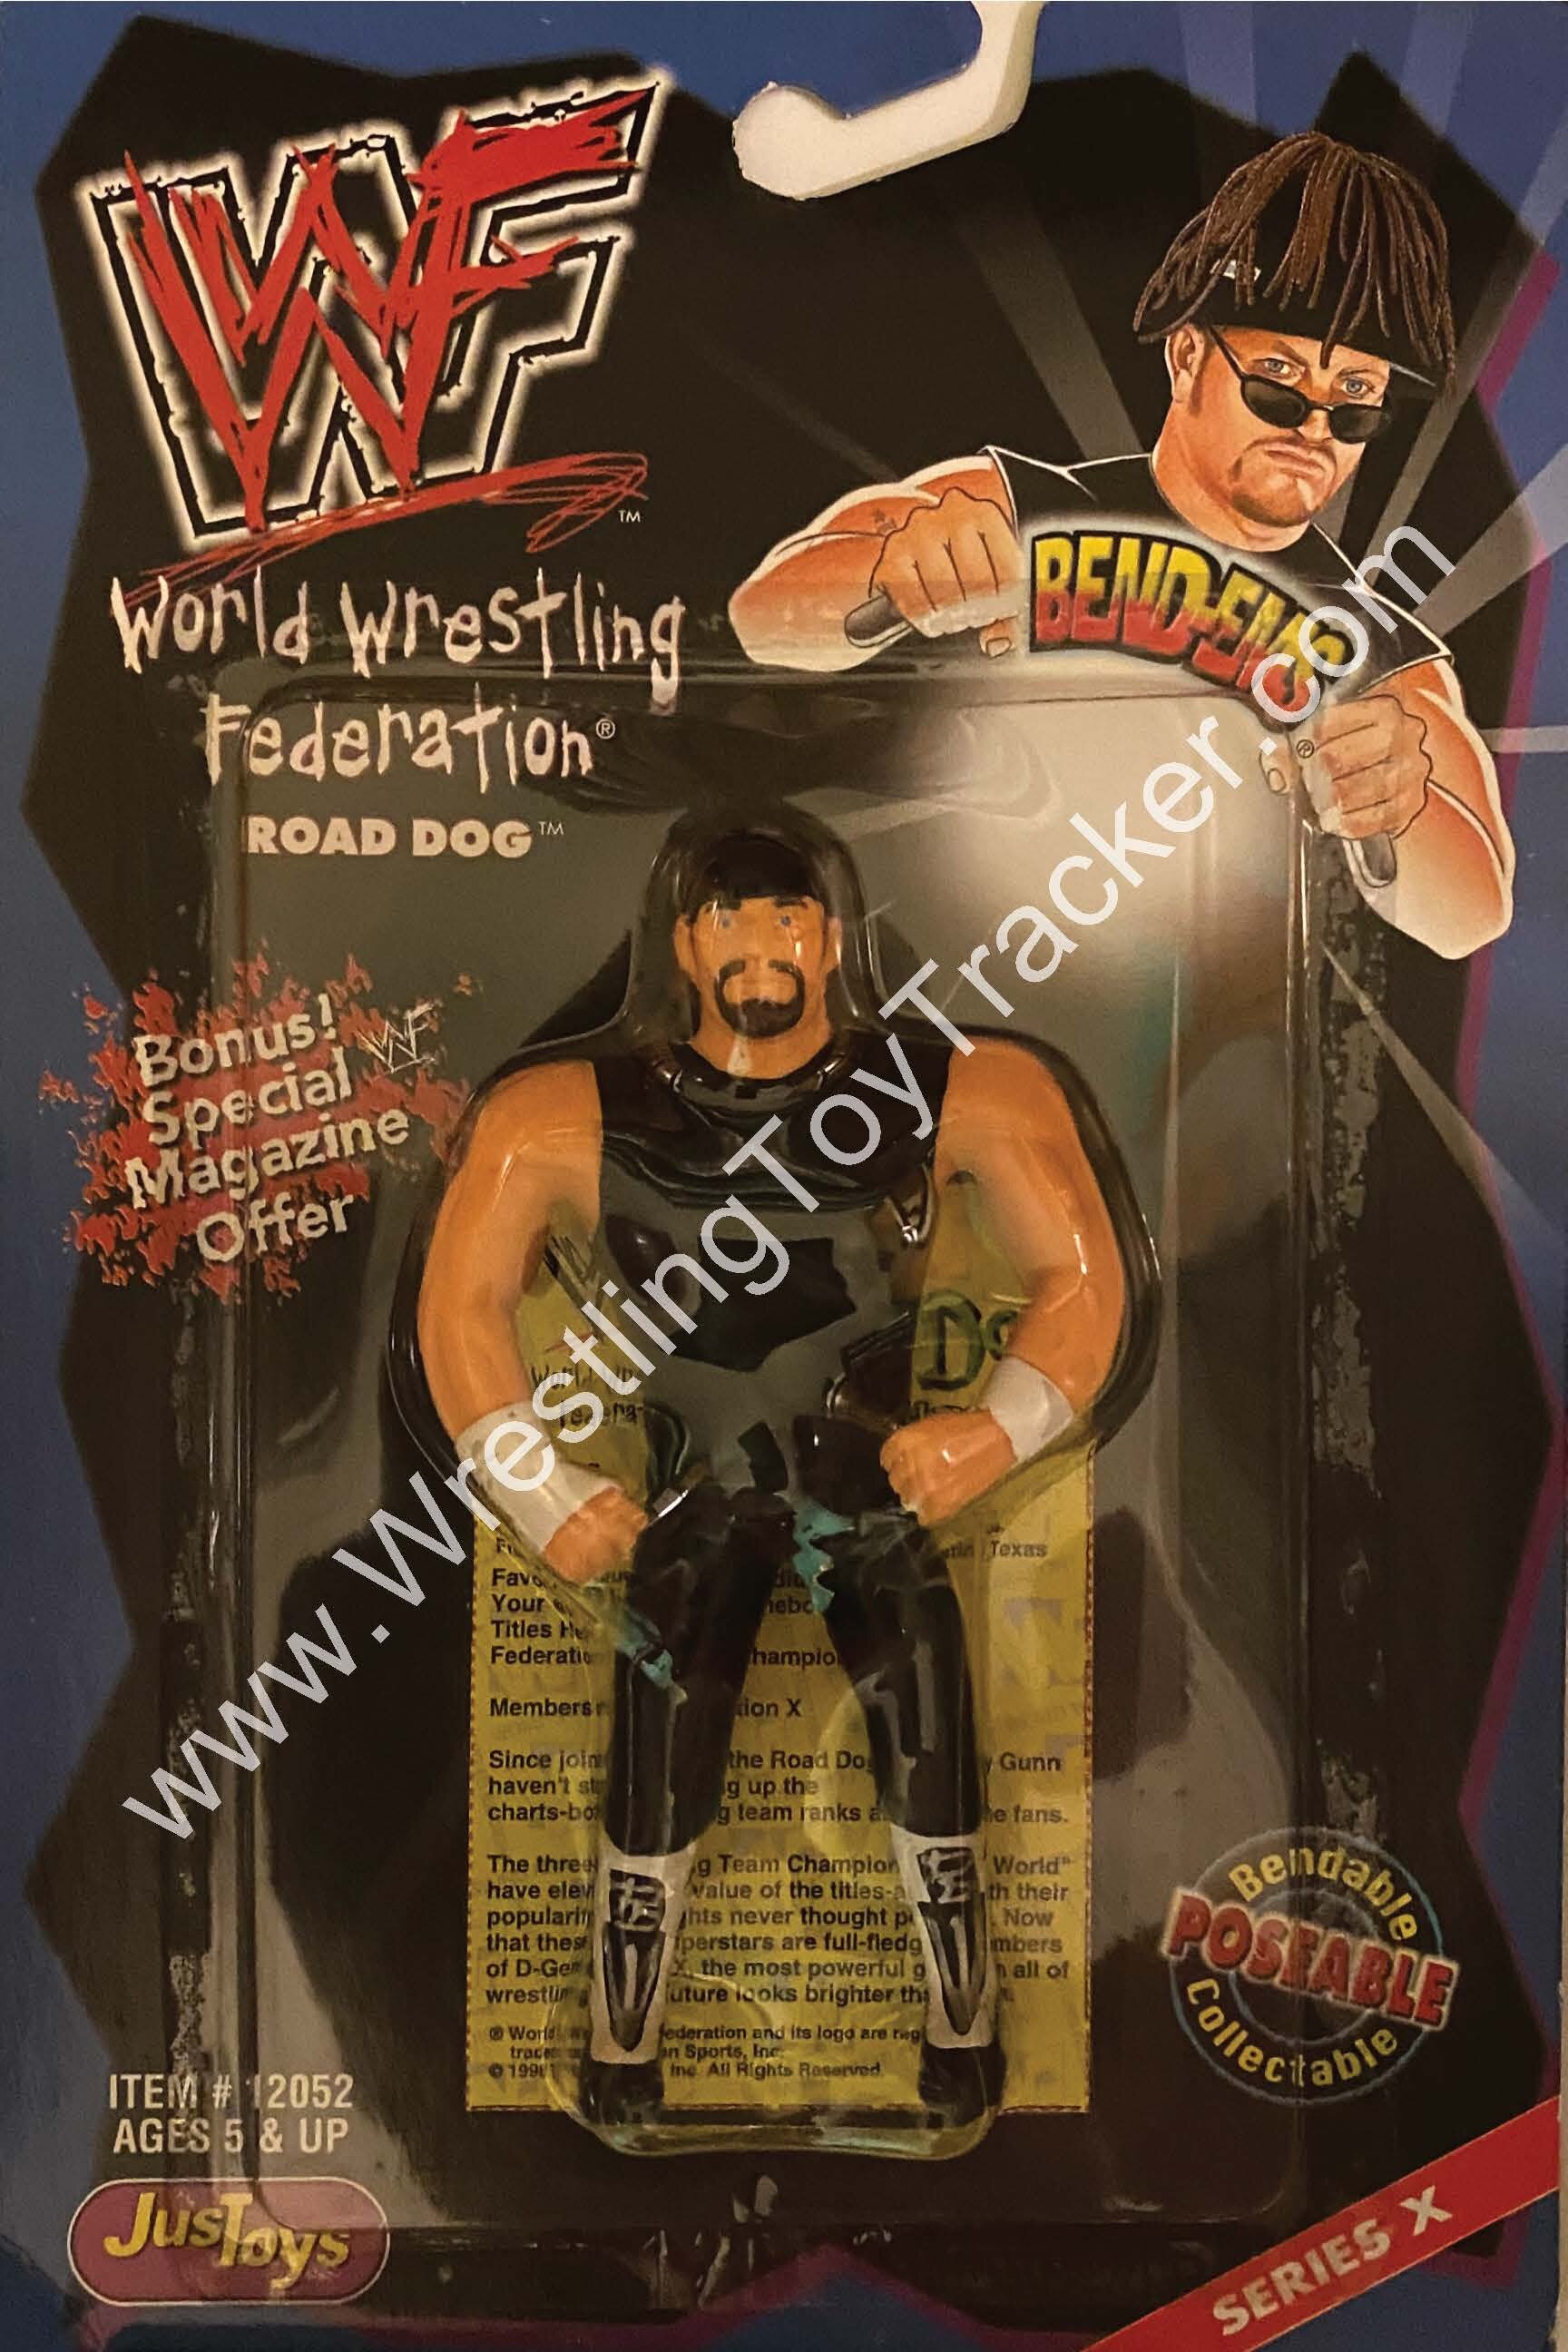 New RARE WWF BEND-EMS Collectables By JusToys Series V,VI,VII,VIII from 1997 